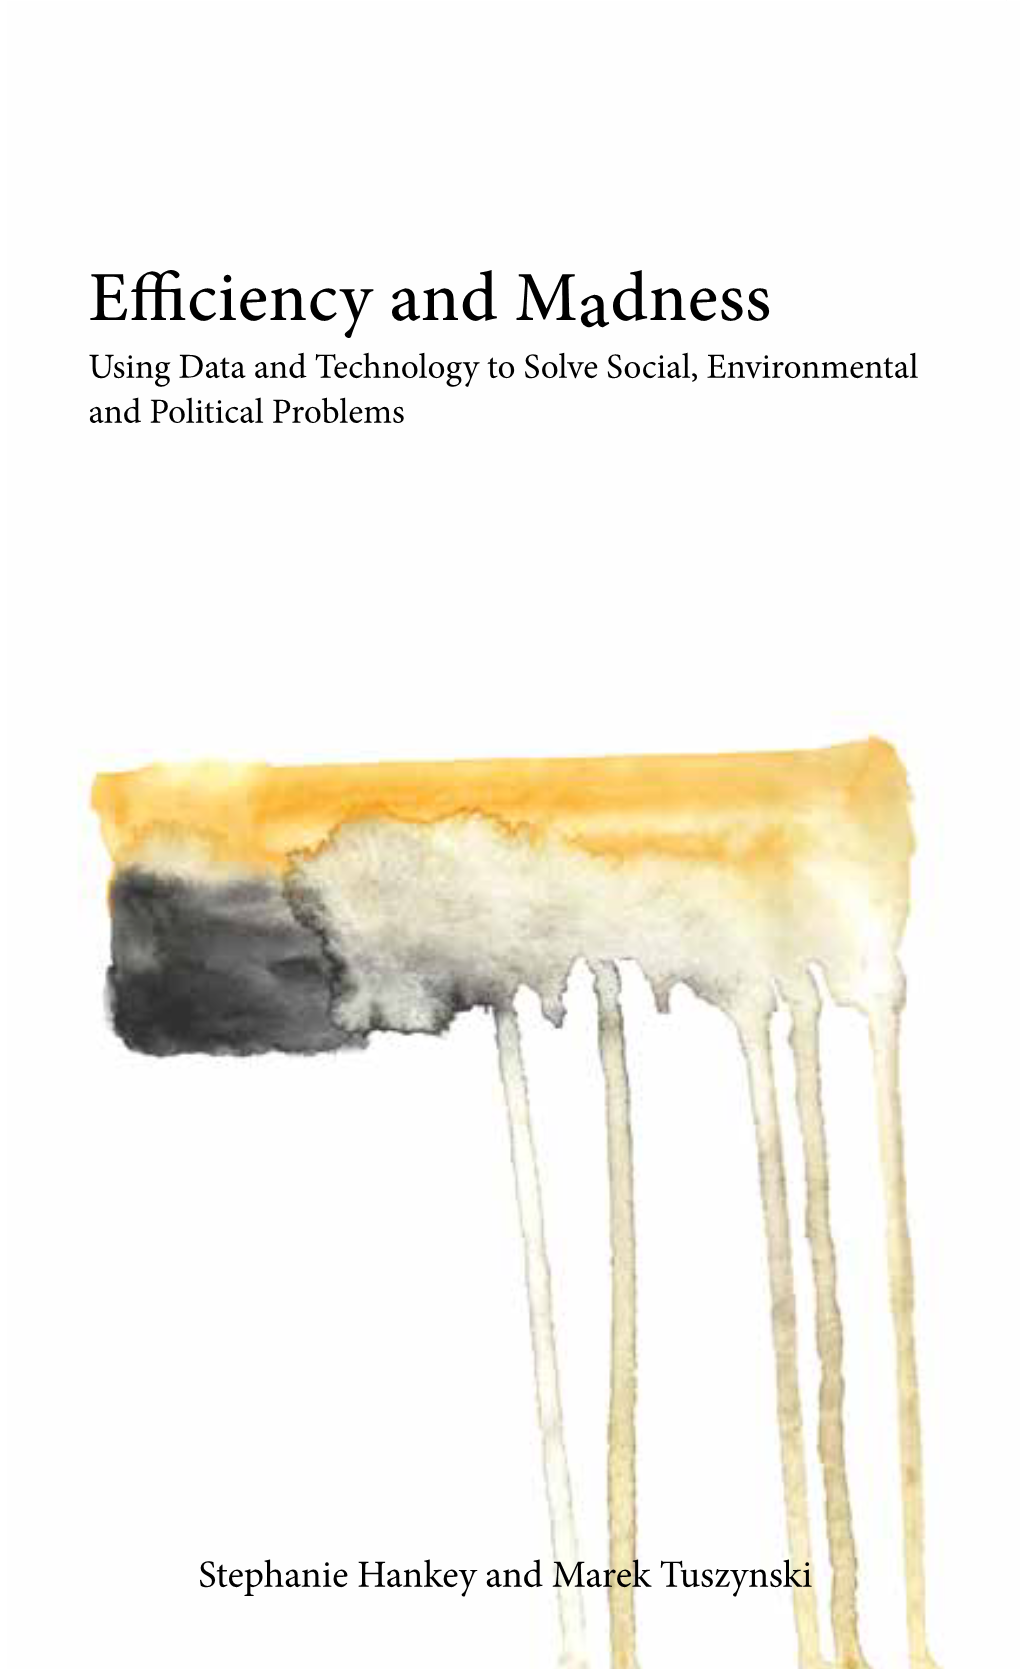 Efficiency and Madness Using Data and Technology Environmental to Solve Social, and Political Problems